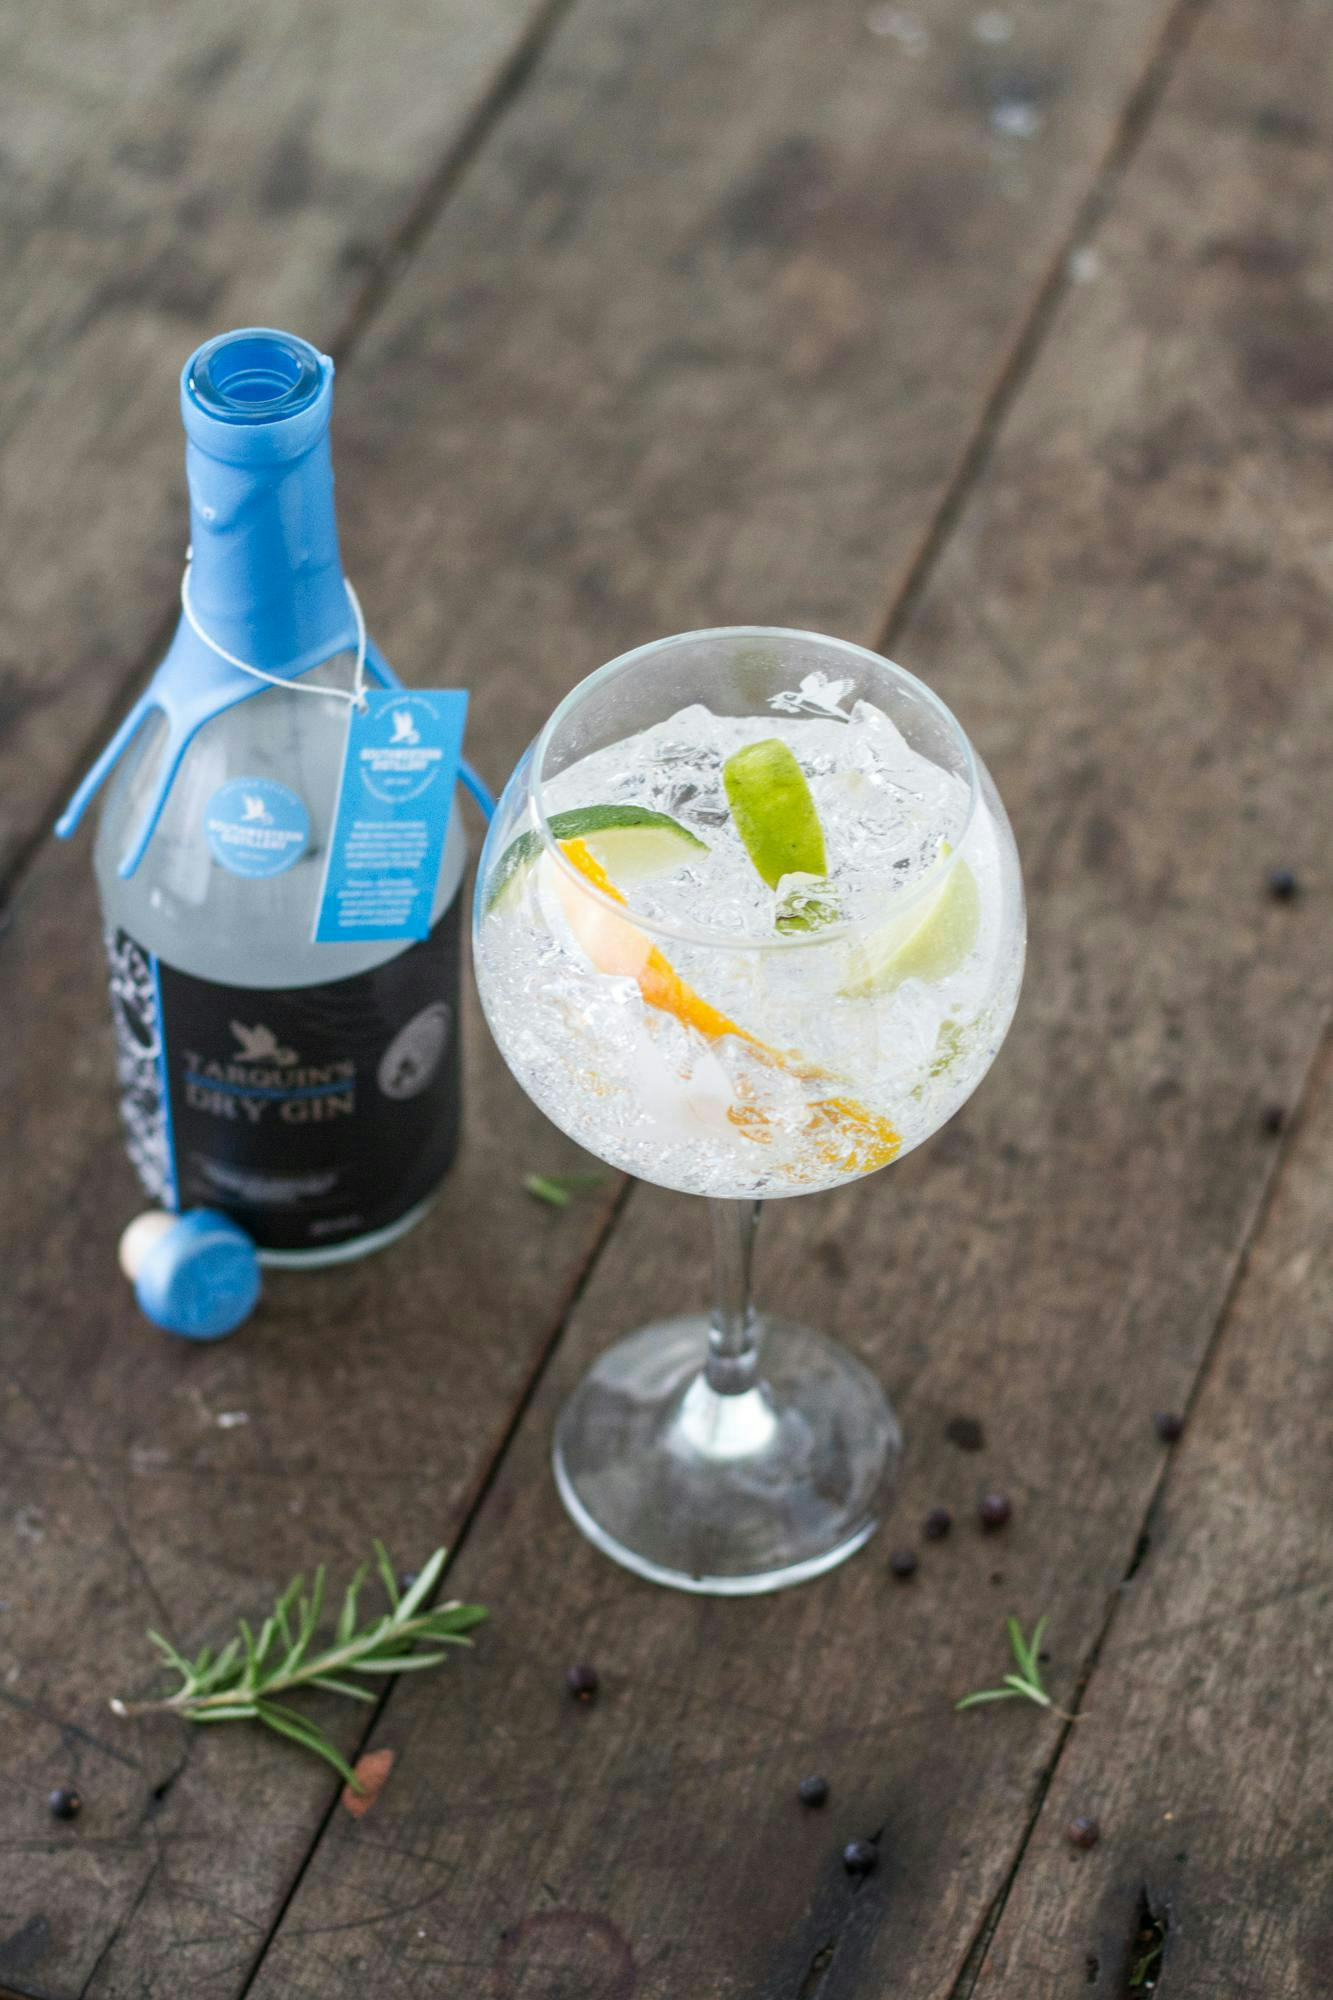 5 awesome places to celebrate World Gin Day across the UK